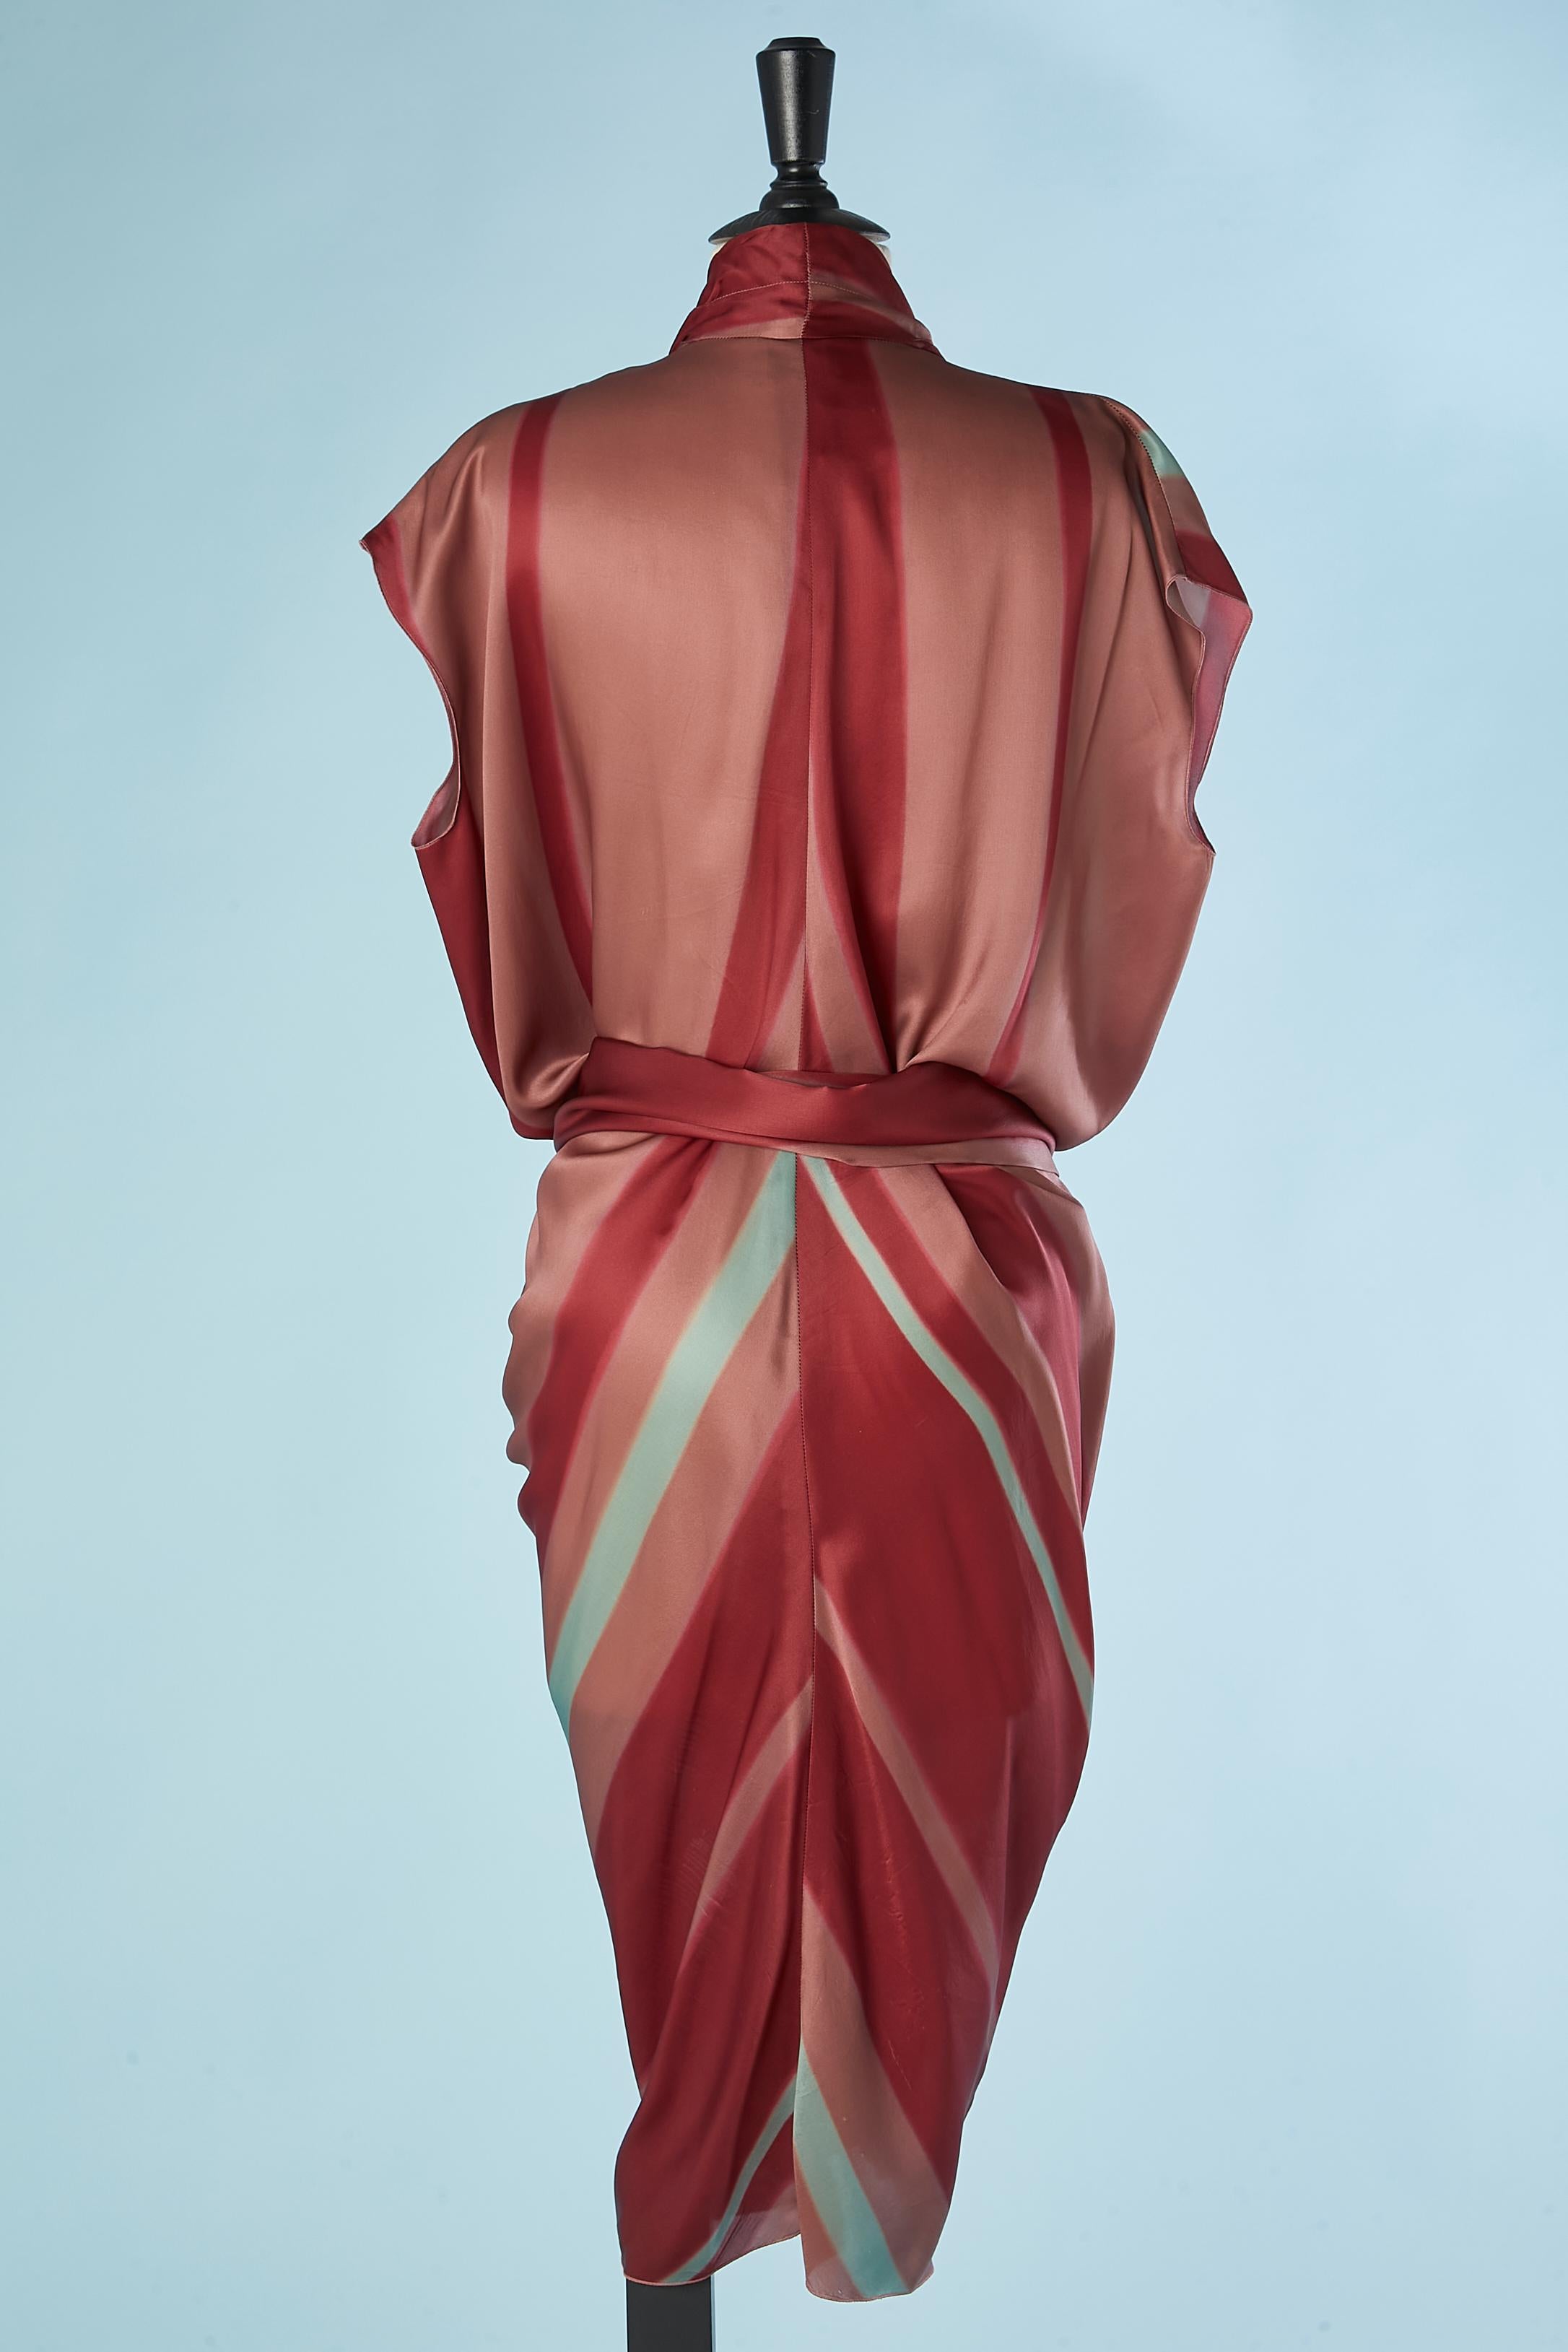 Striped silk cocktail dress drape and wrap in the front Lanvin by Alber Elbaz  1